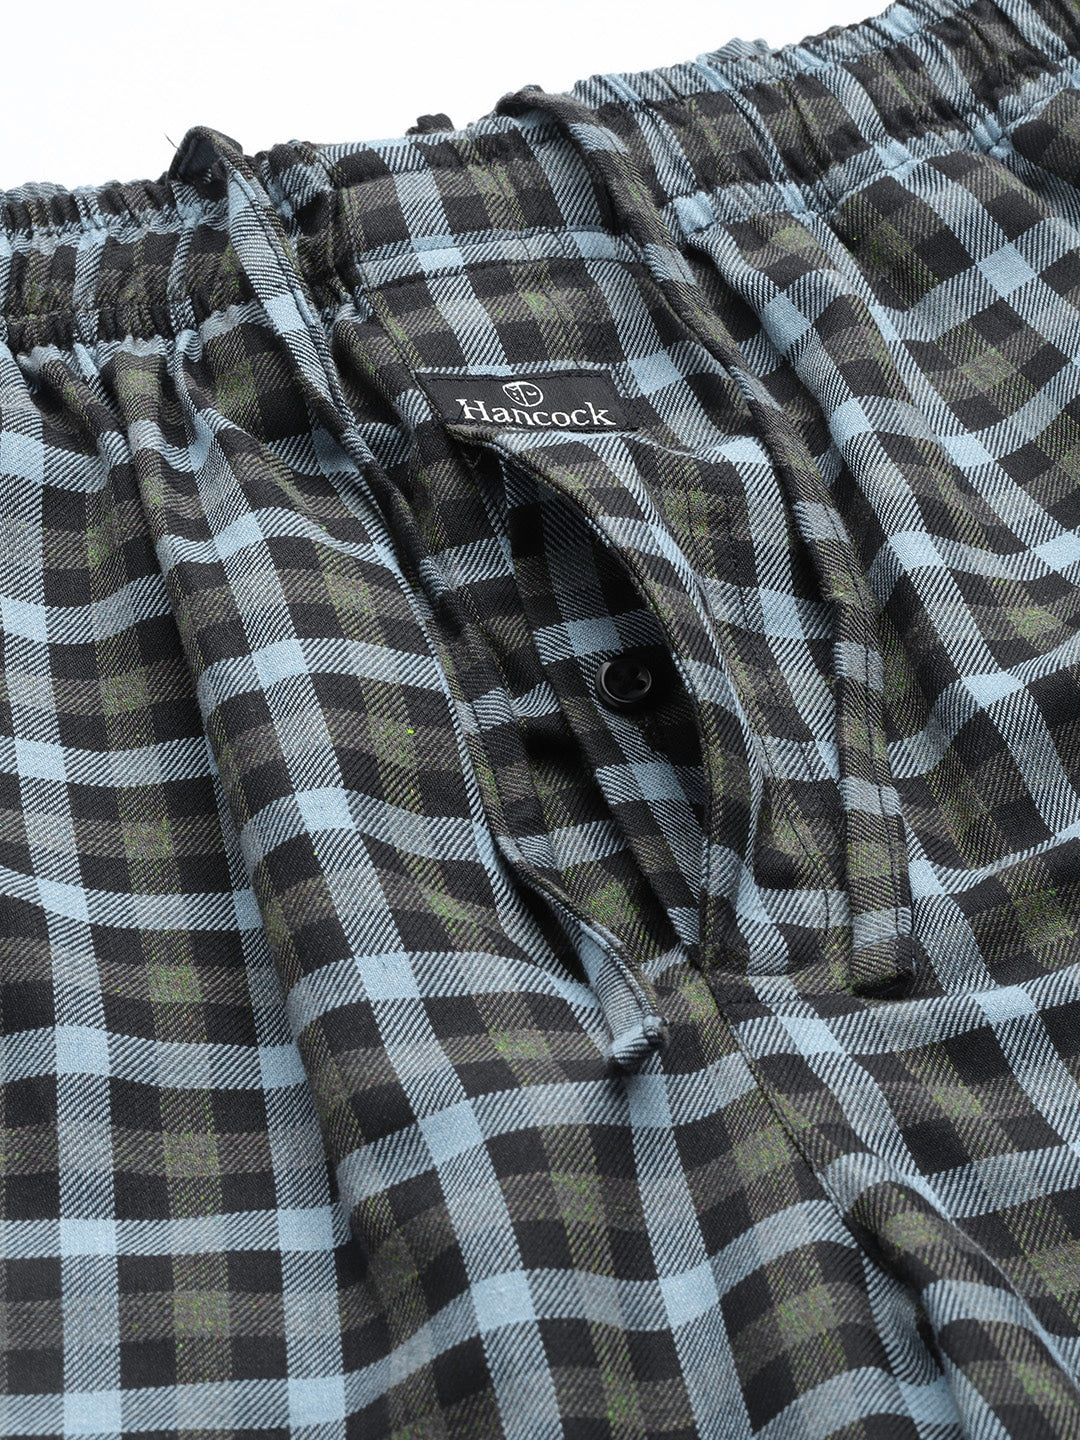 Men Black & grey Checks Pure Cotton Relaxed Fit Casual Lounge Pant